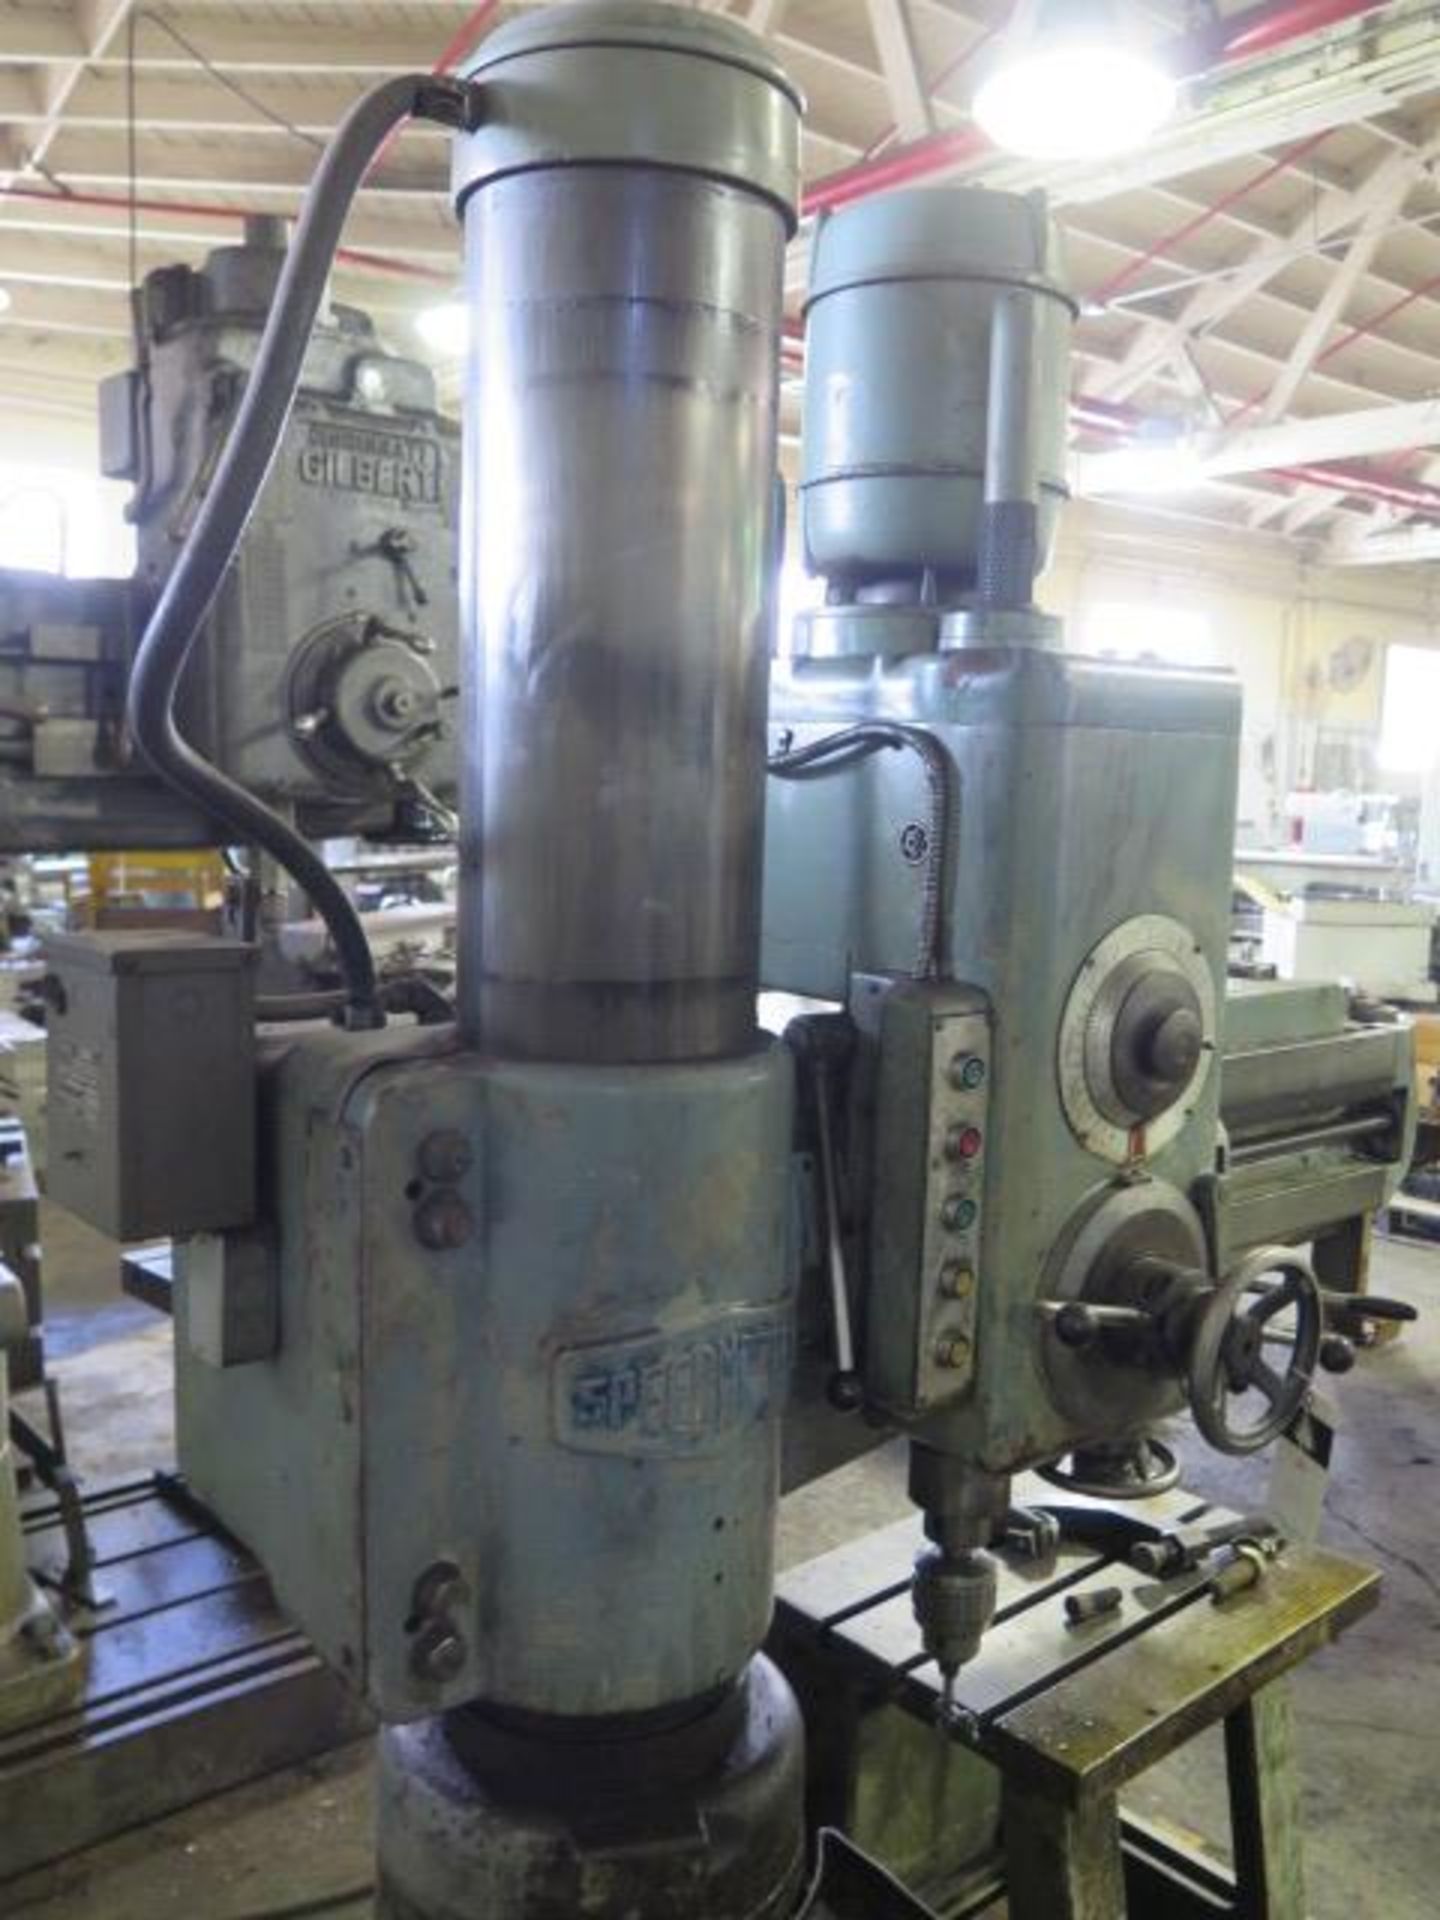 Speedmaster 9” Column x 24” Radial Arm Drill w/ 61-2100 RPM, Power Column and Feeds, SOLD AS IS - Image 7 of 8